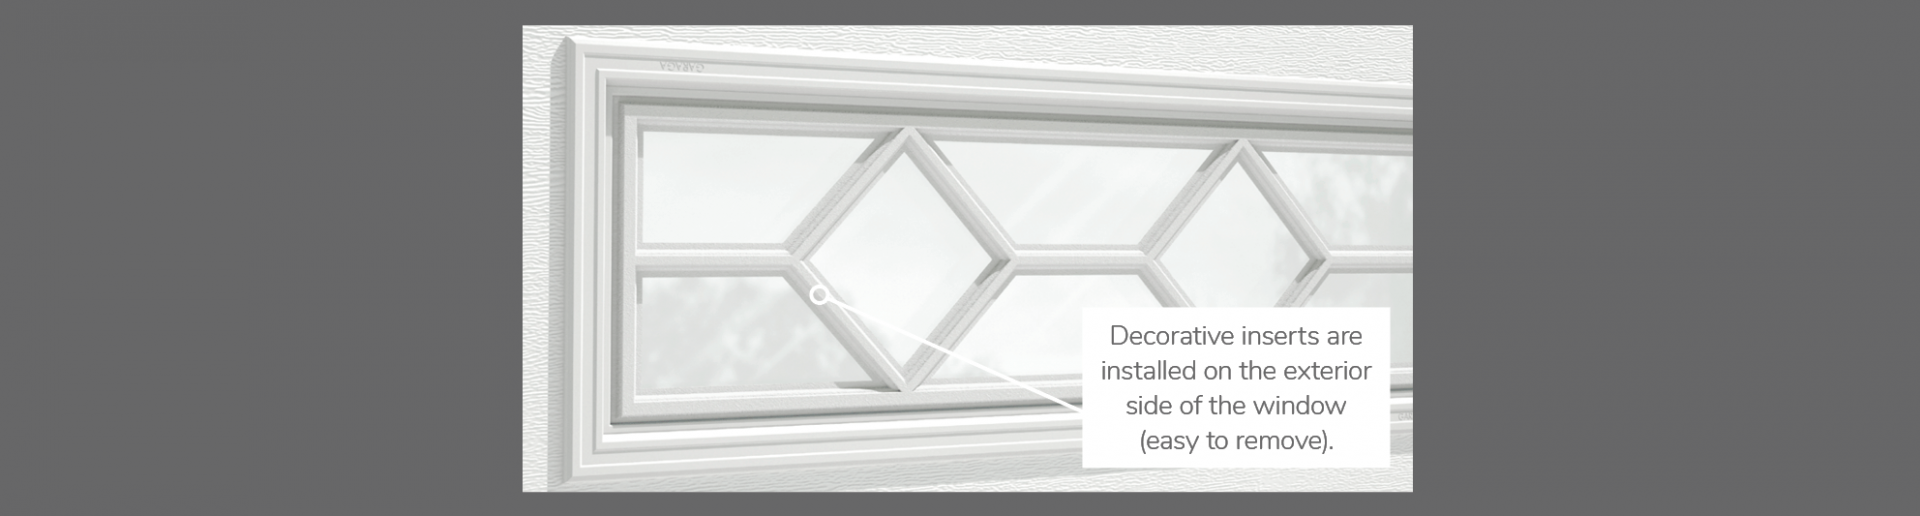 Waterton Decorative Insert, 40" x 13" or 21" x 13", available for door R-16 and R-12